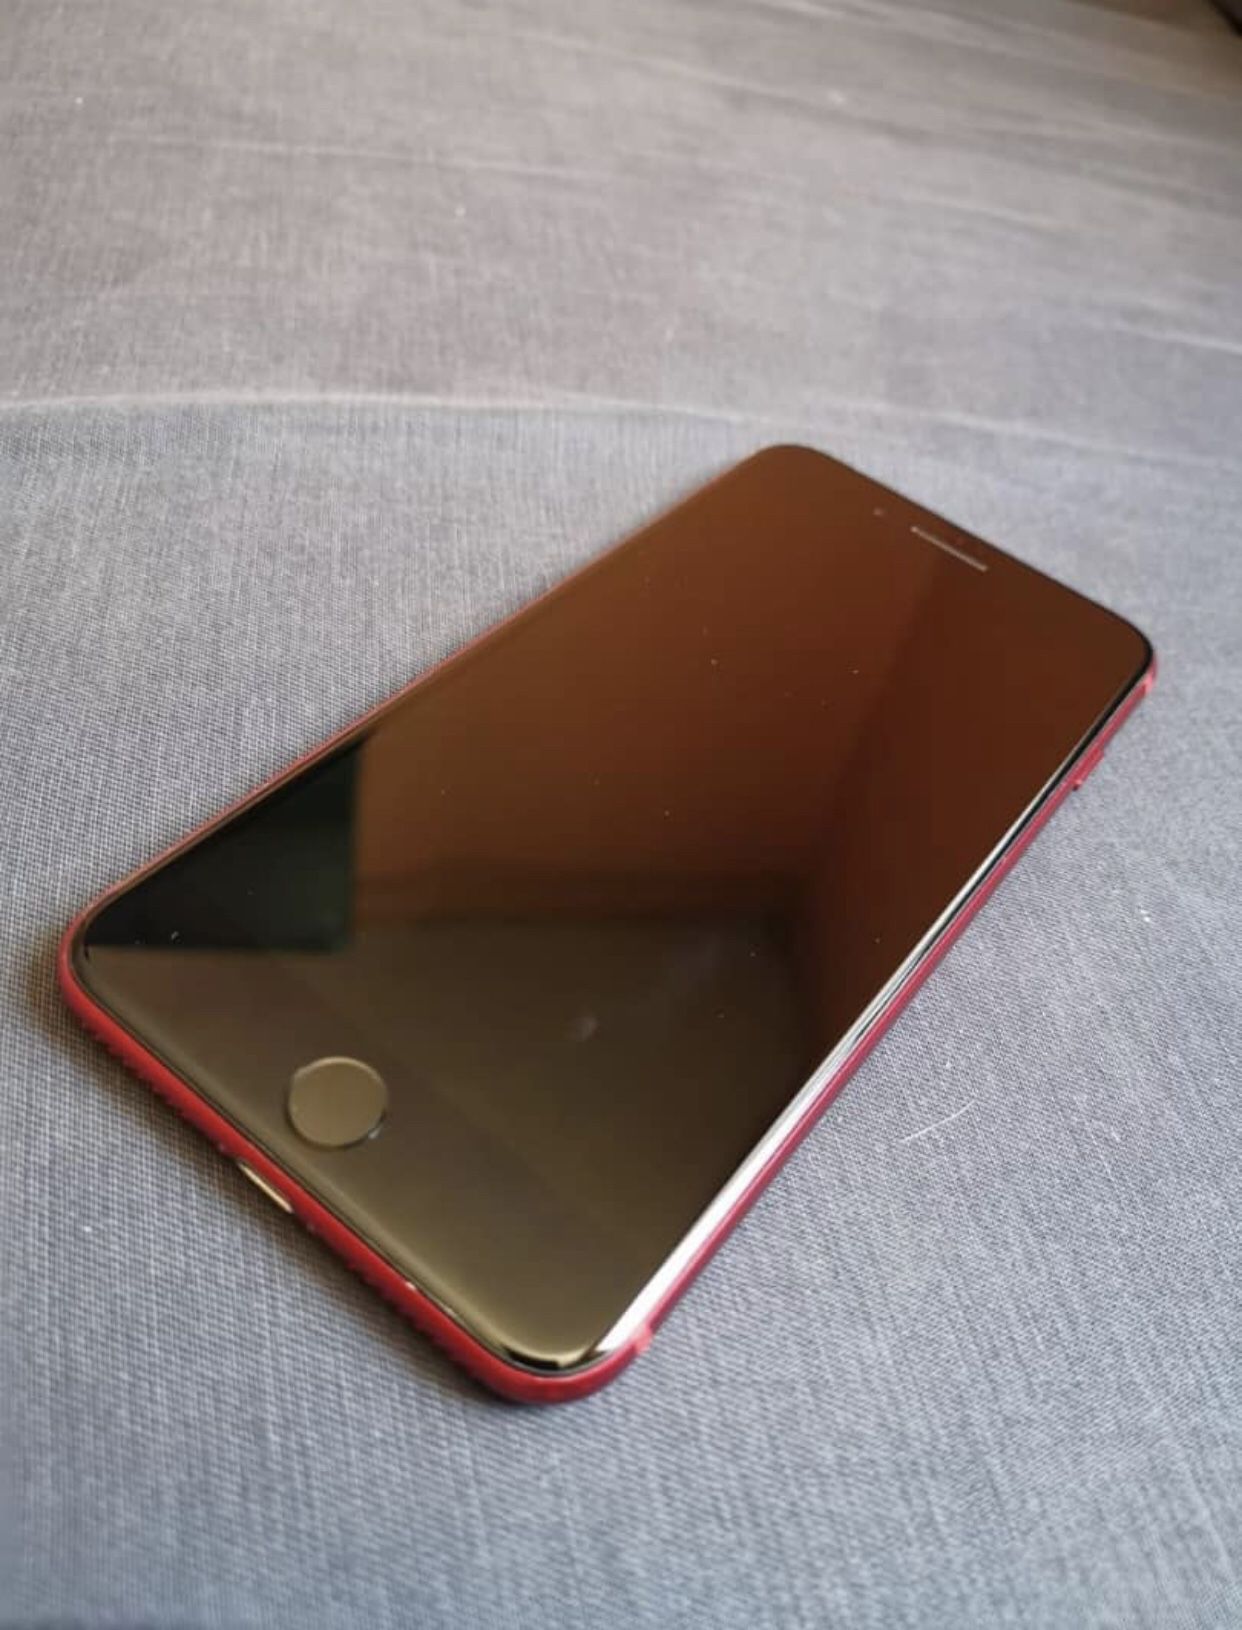 Apple iPhone 8 Plus (PRODUCT)RED - 64GB - (Sprint)A1864